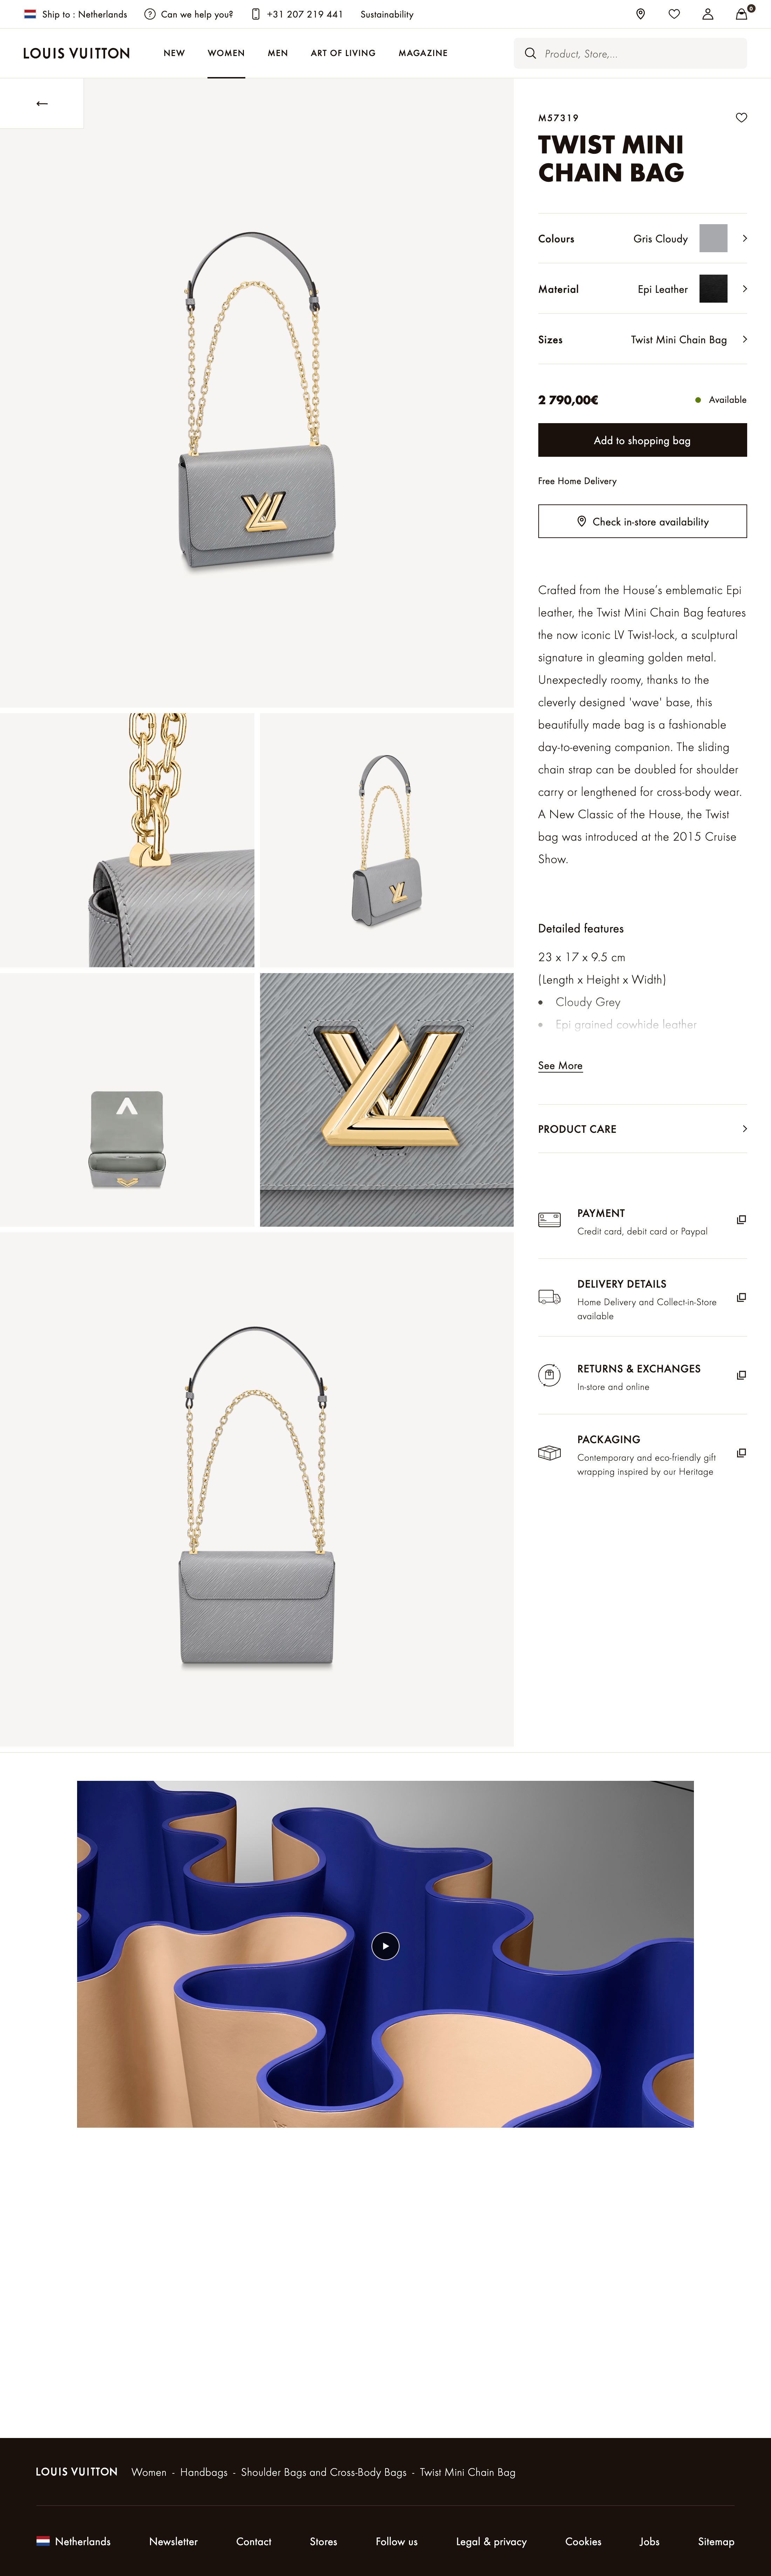 Louis Vuitton's Product Page – 530 of 1077 Product Page Examples